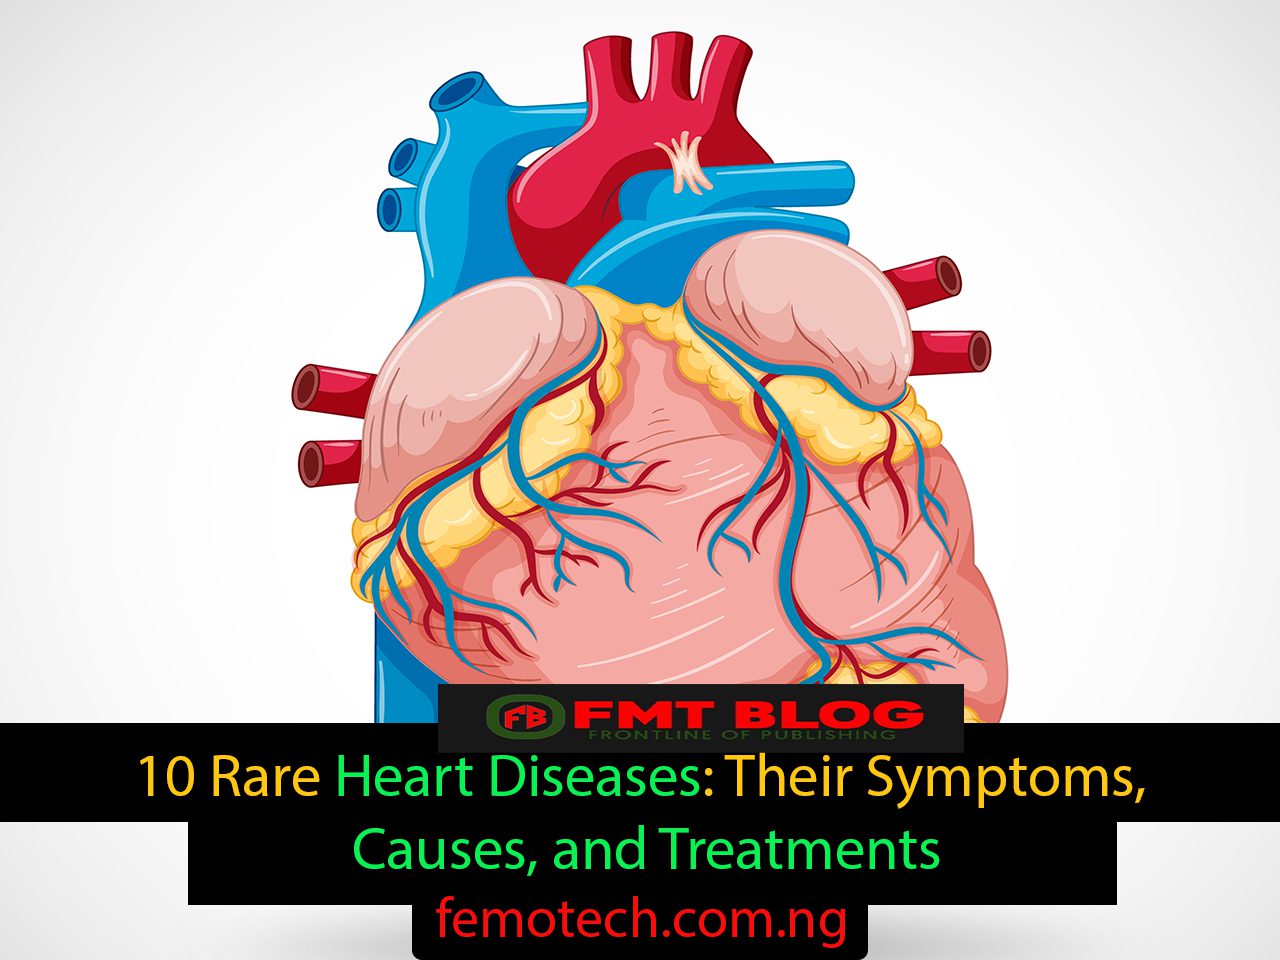 10 Rare Heart Diseases: Their Symptoms, Causes, and Treatments